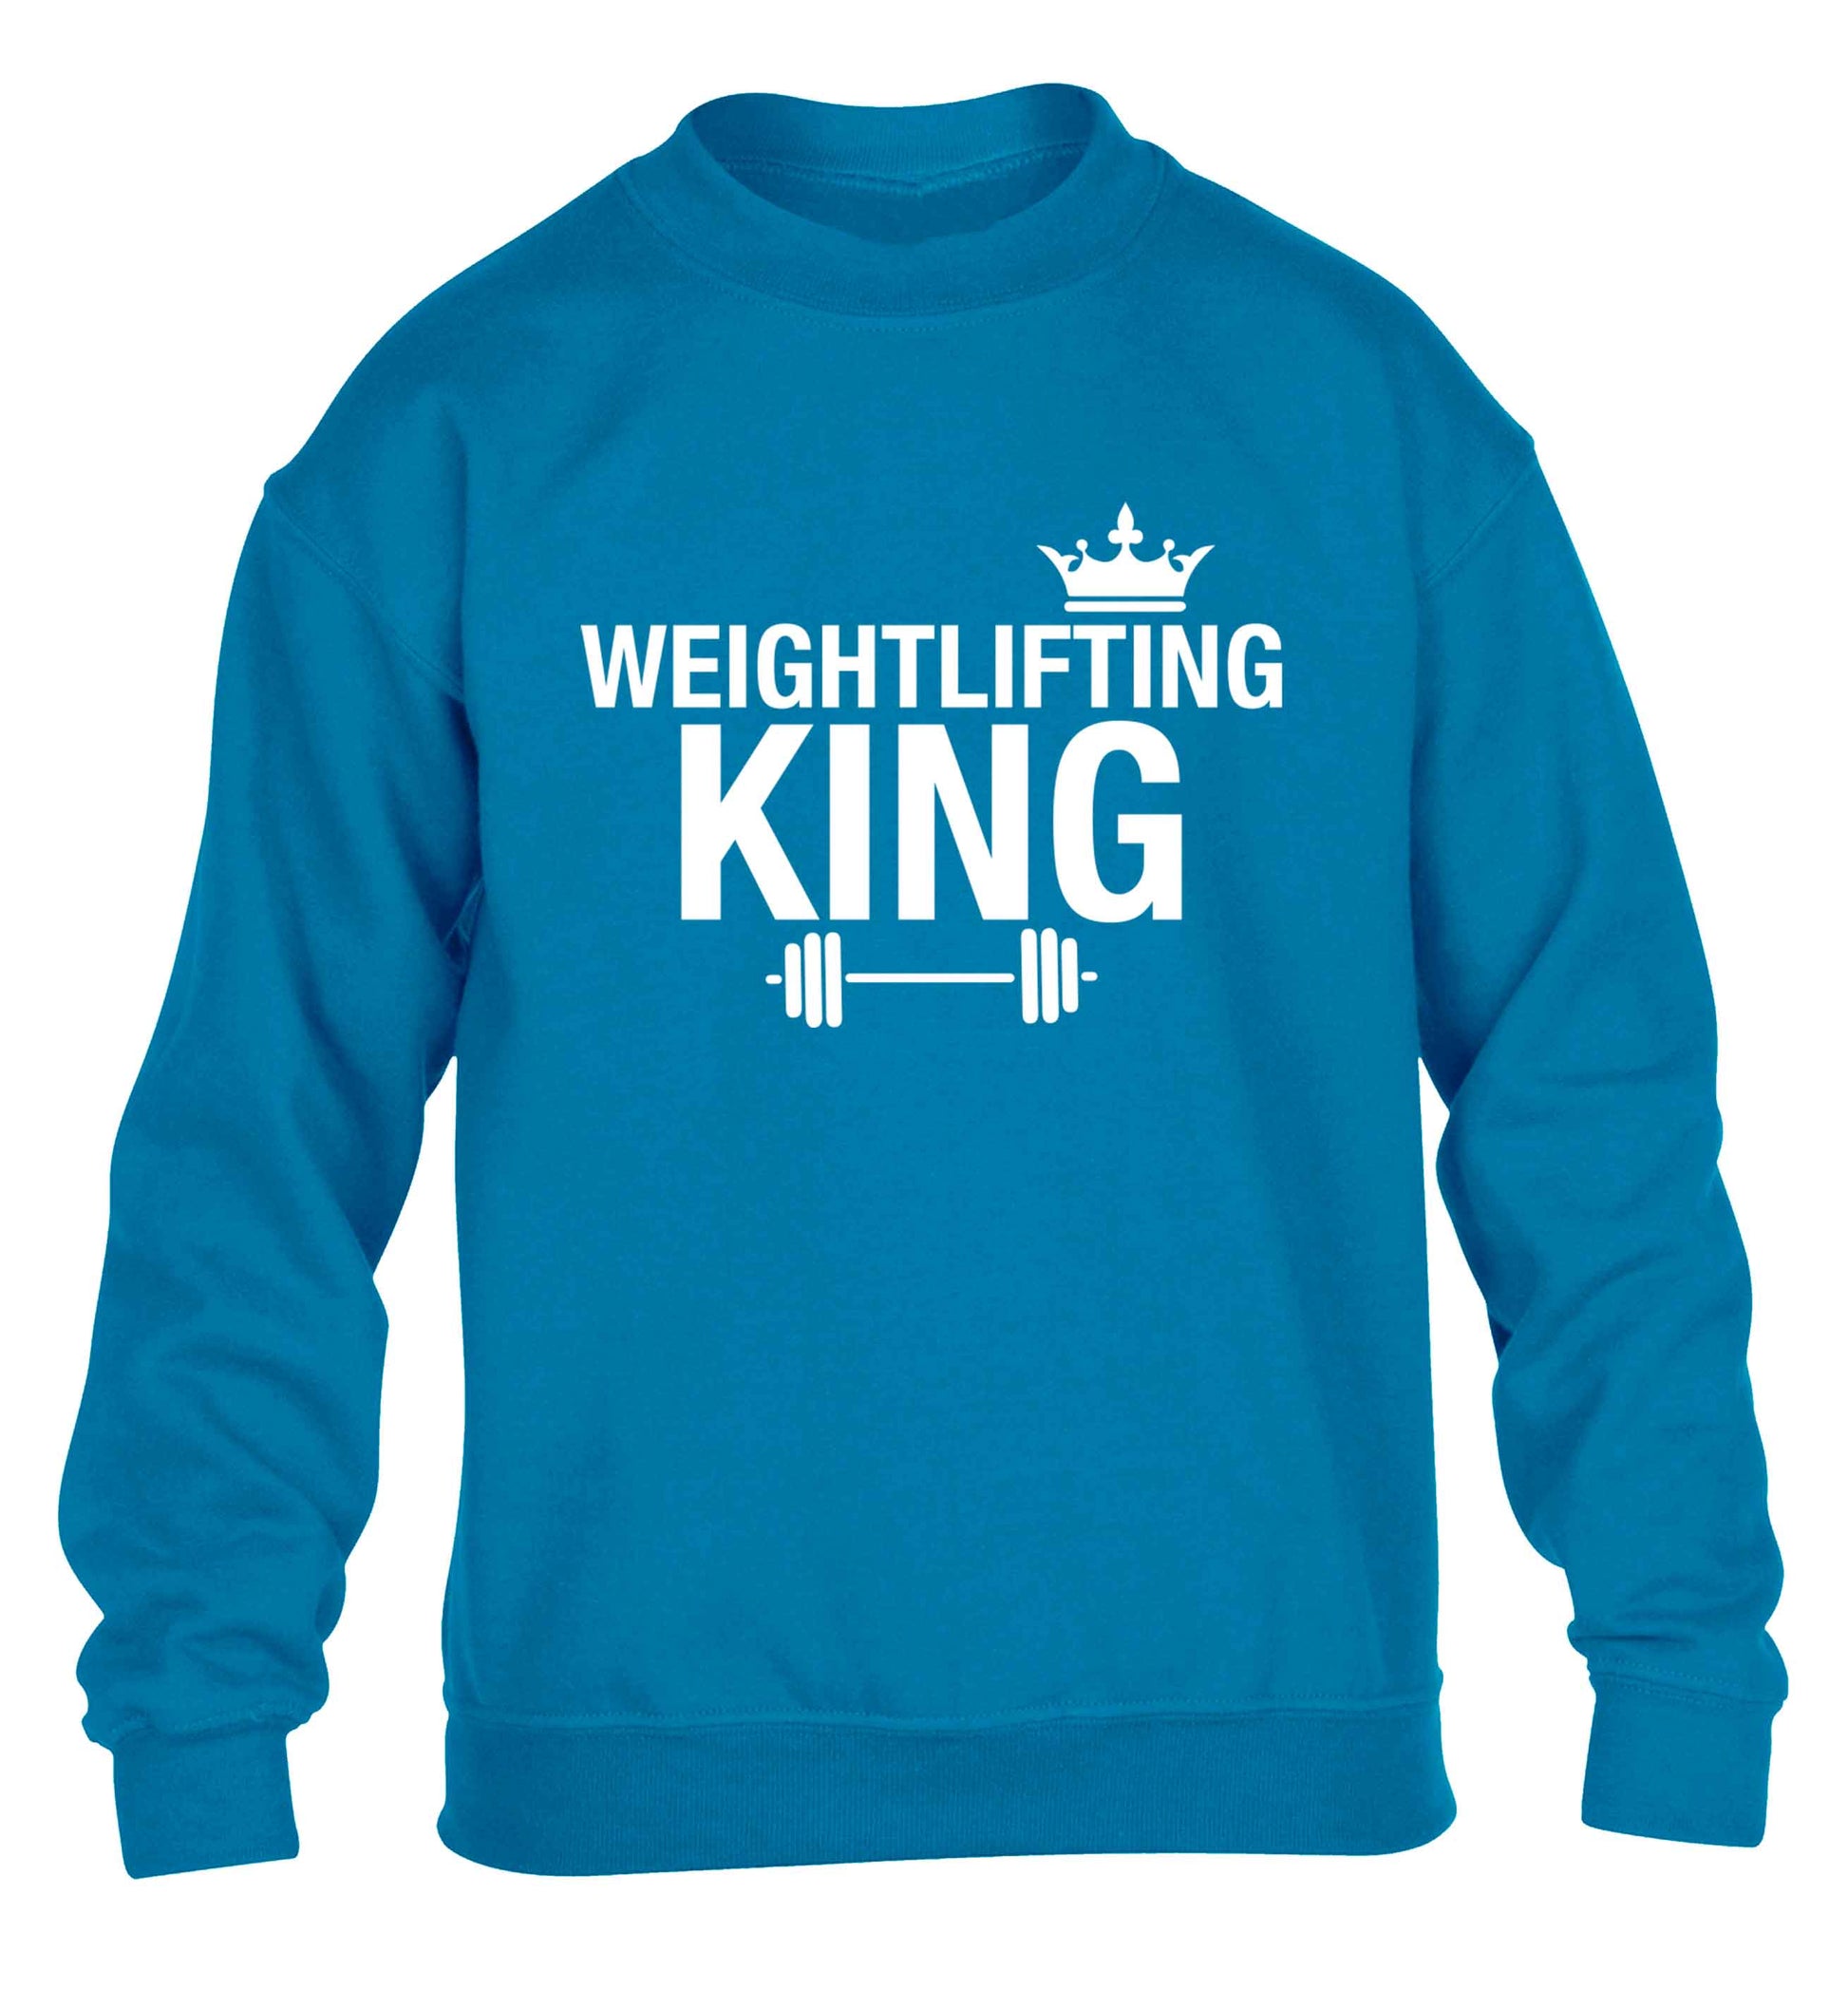 Weightlifting king children's blue sweater 12-13 Years